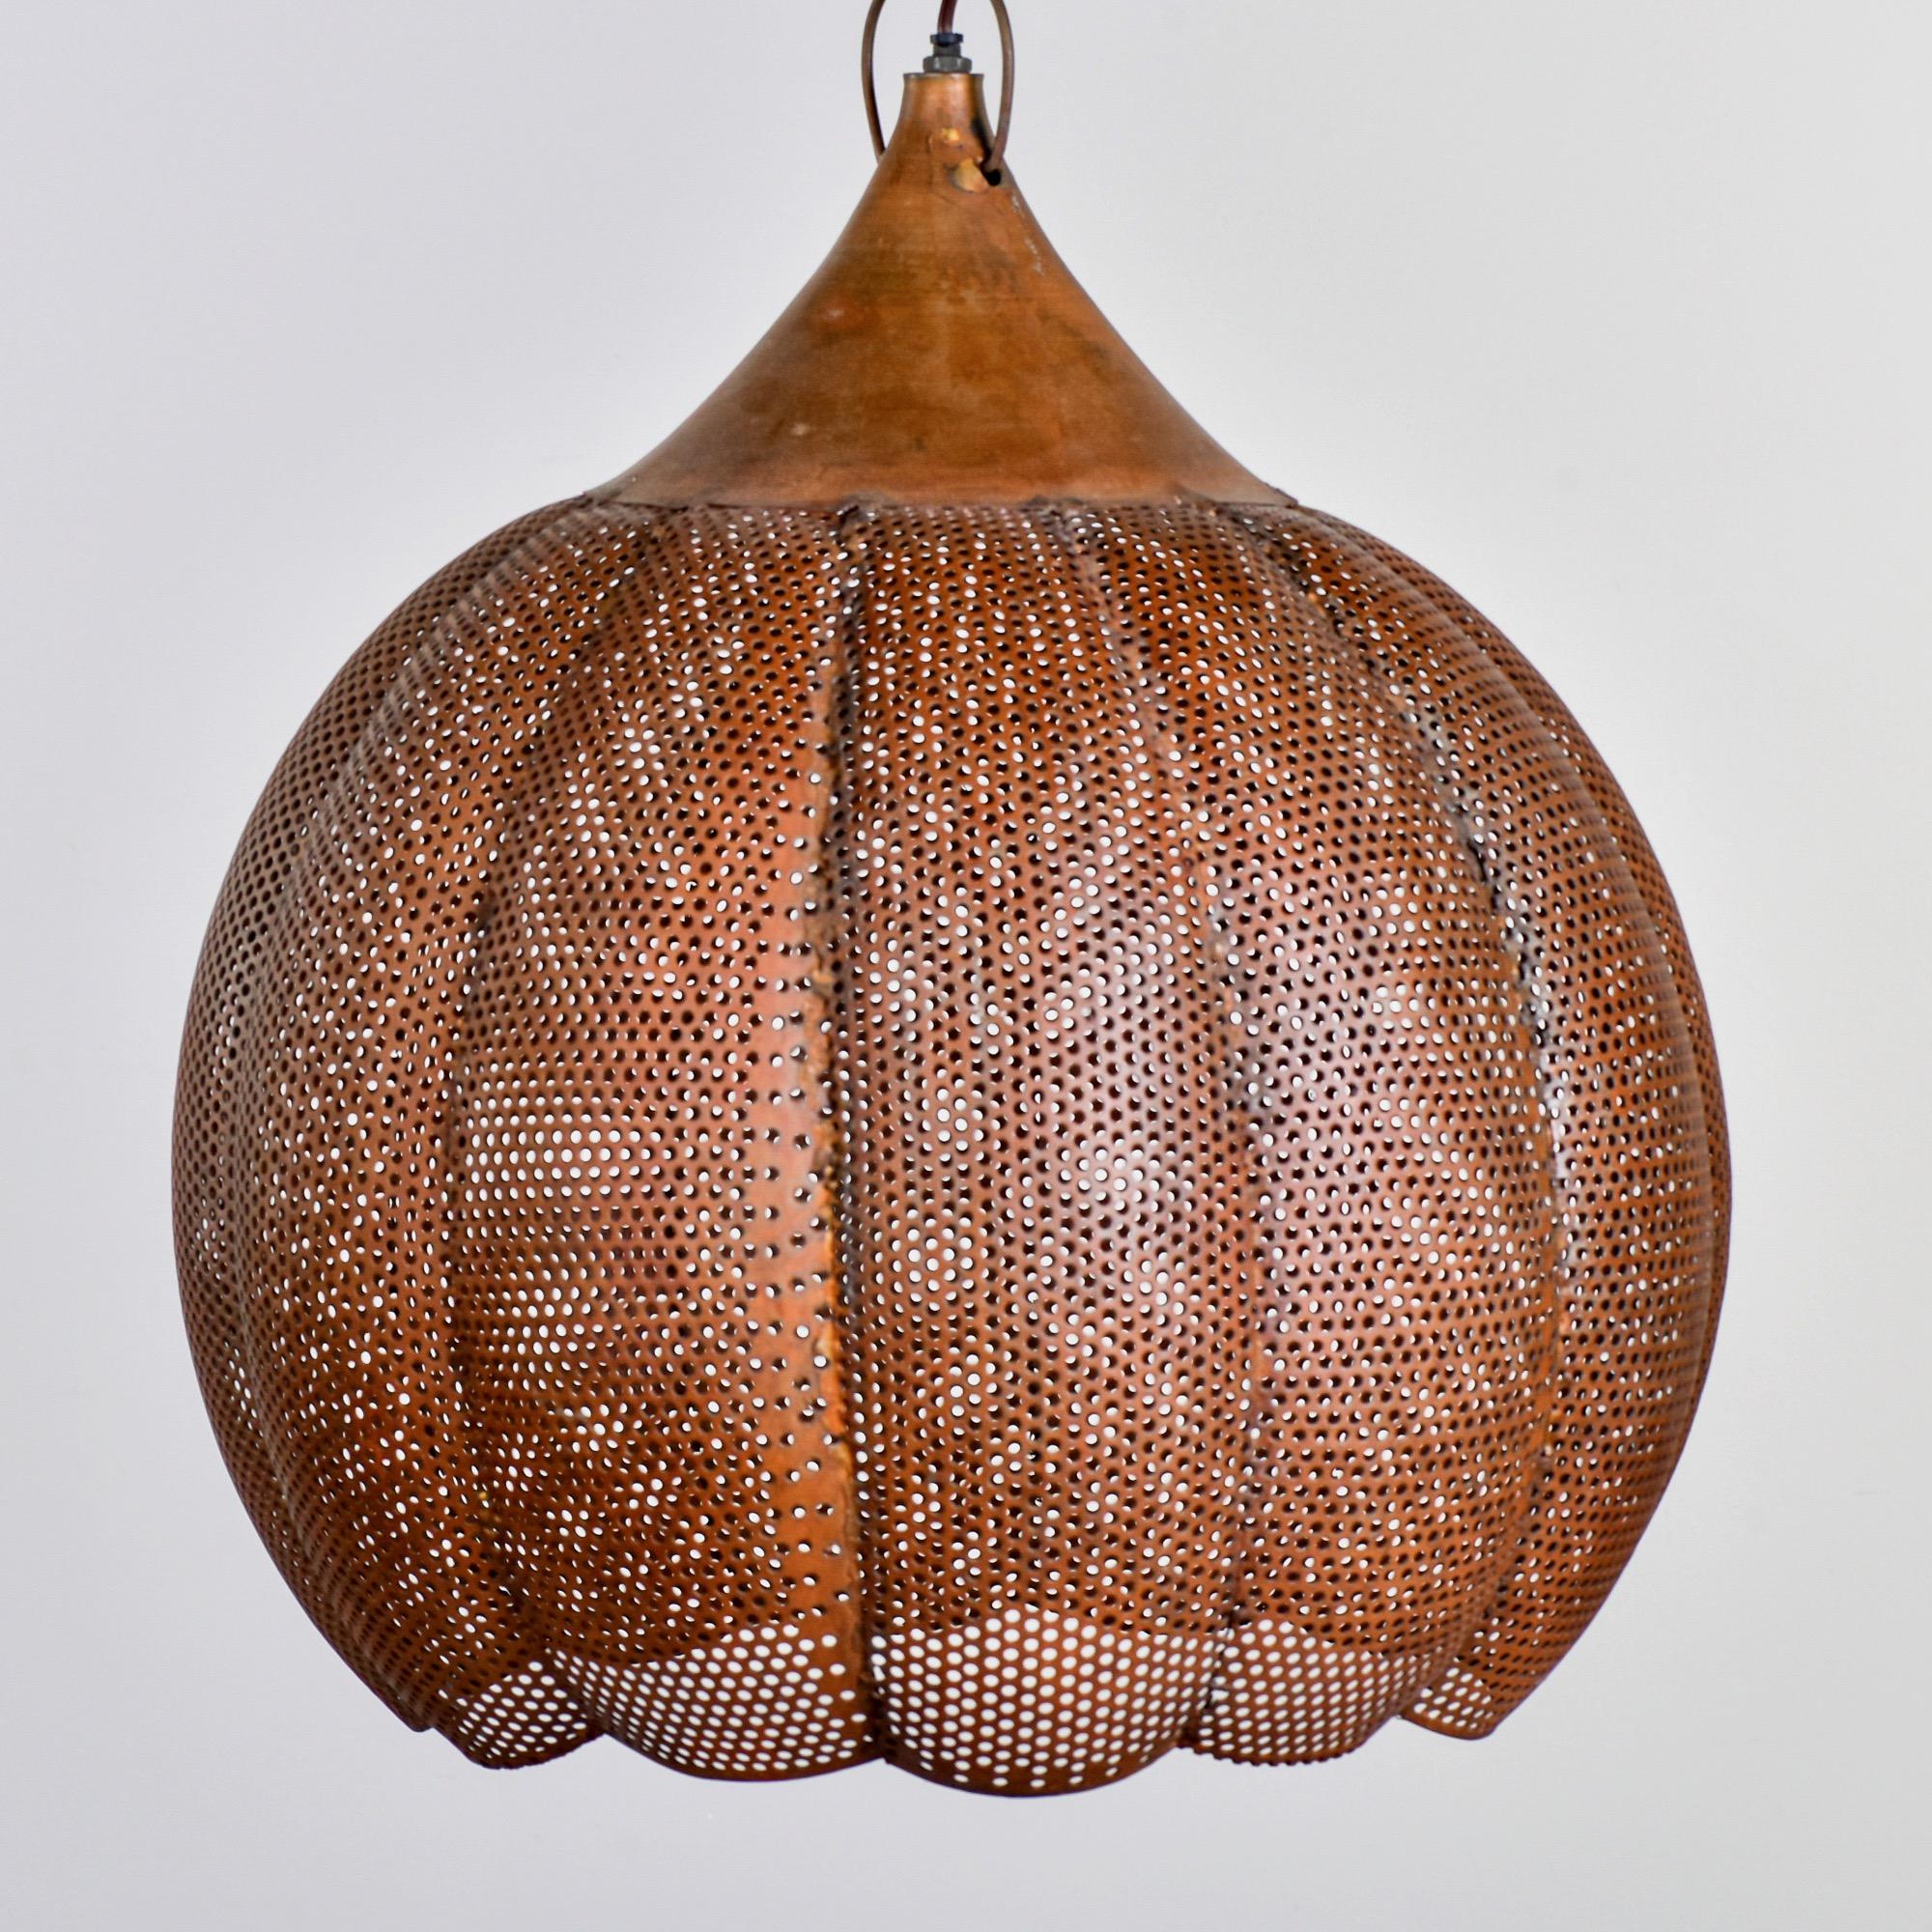 Hanging pendant made of pierced copper in a gourd-like form, circa 1990s. Fixture has one standard sized socket. Found in England. Unknown maker. Wiring has been updated for US electrical standards.